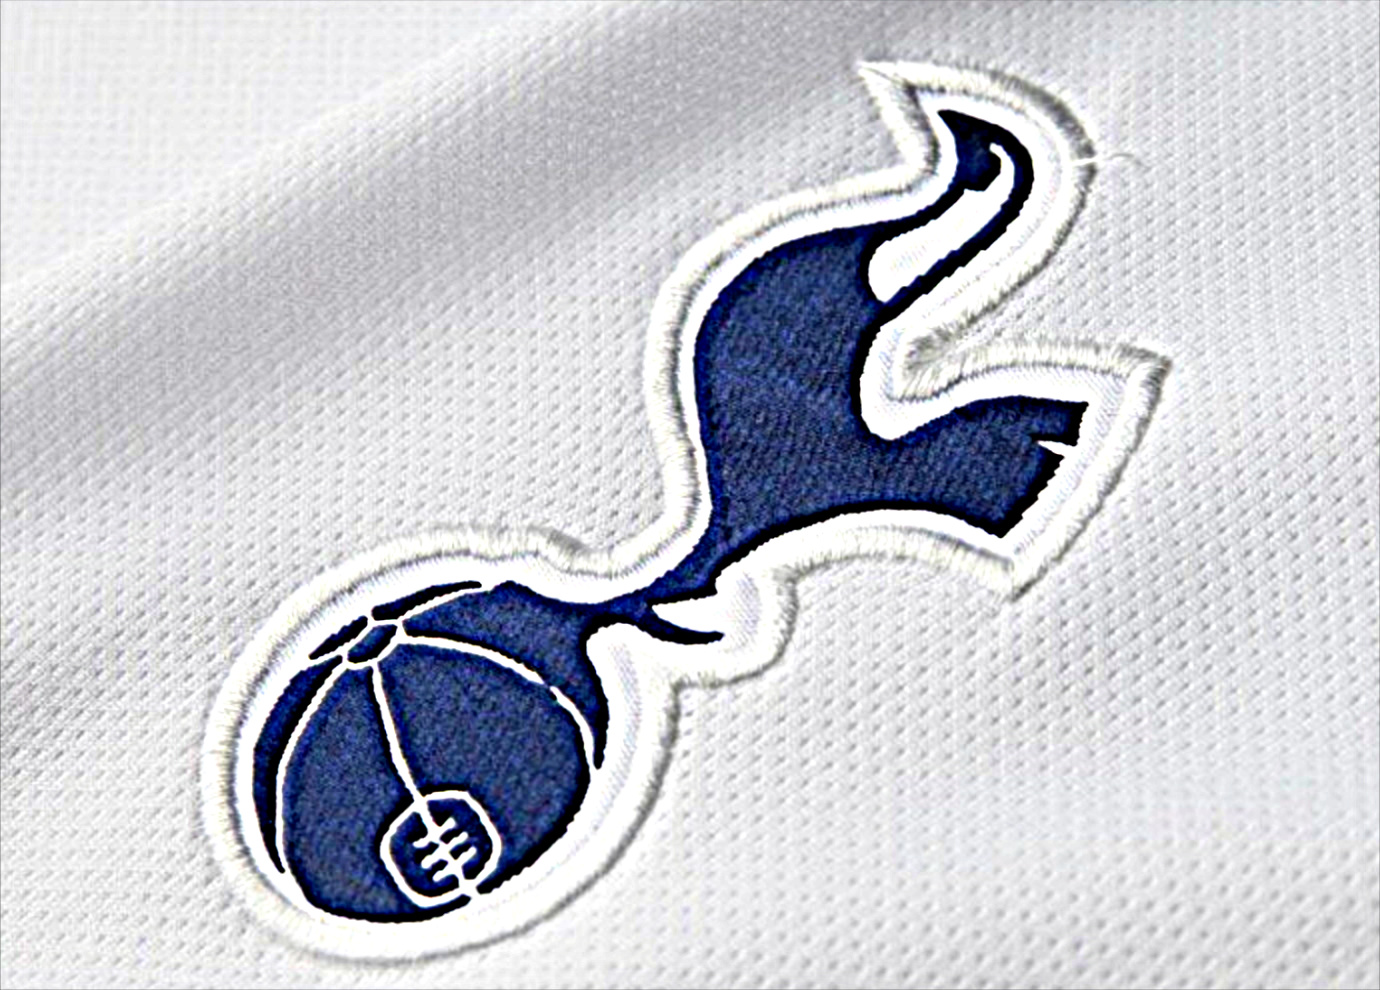 Leaked Image: Spurs to go with retro Nike logo for third kit?